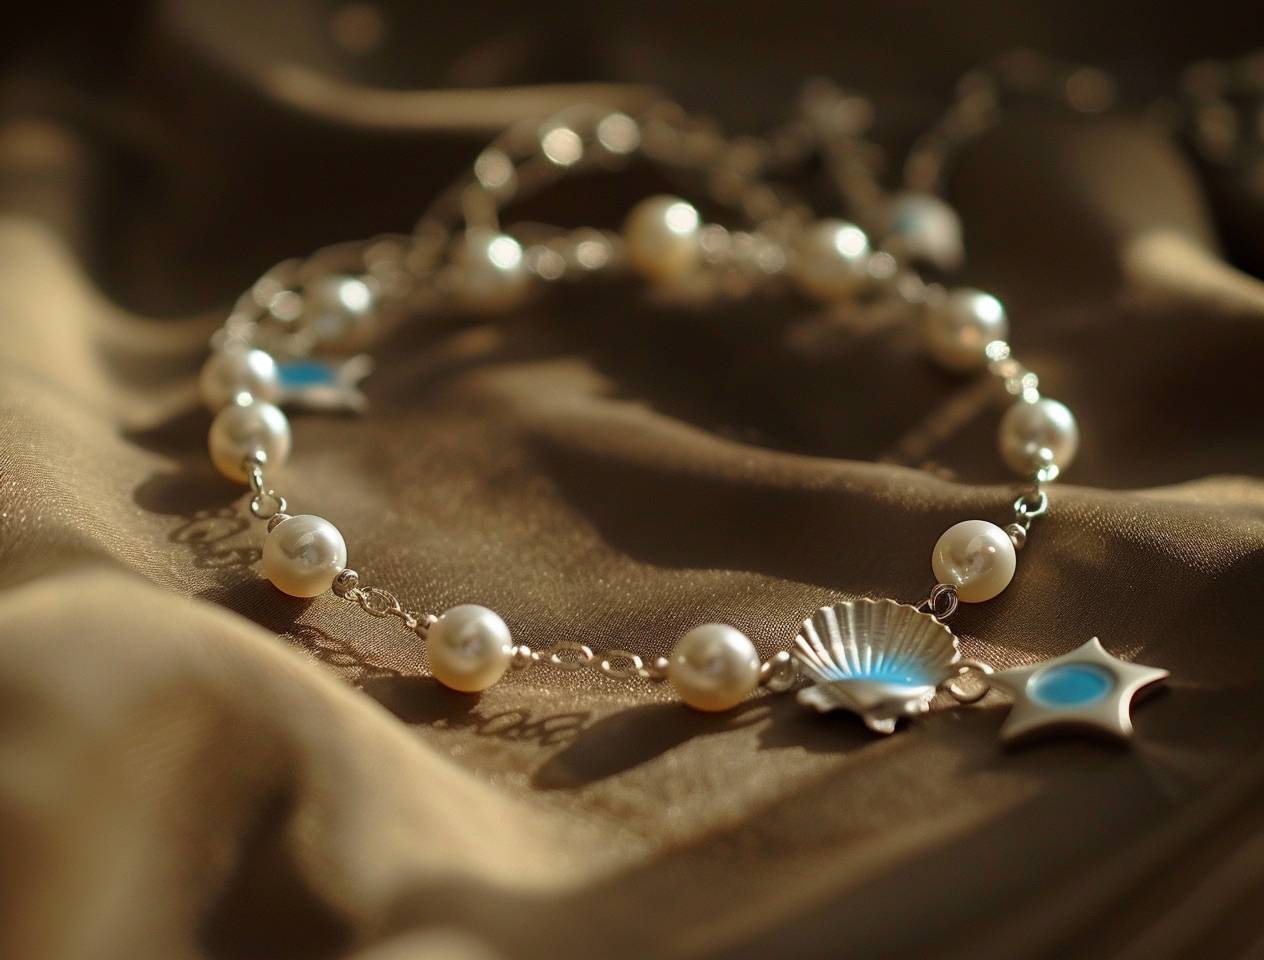 A delicate white pearl bracelet with one blue and silver shell charm, one small star pendant and three pearls in the middle of each chain is a photo taken in the style of an amateur using their phone camera, posted on reddit/ snapchat in 2018.